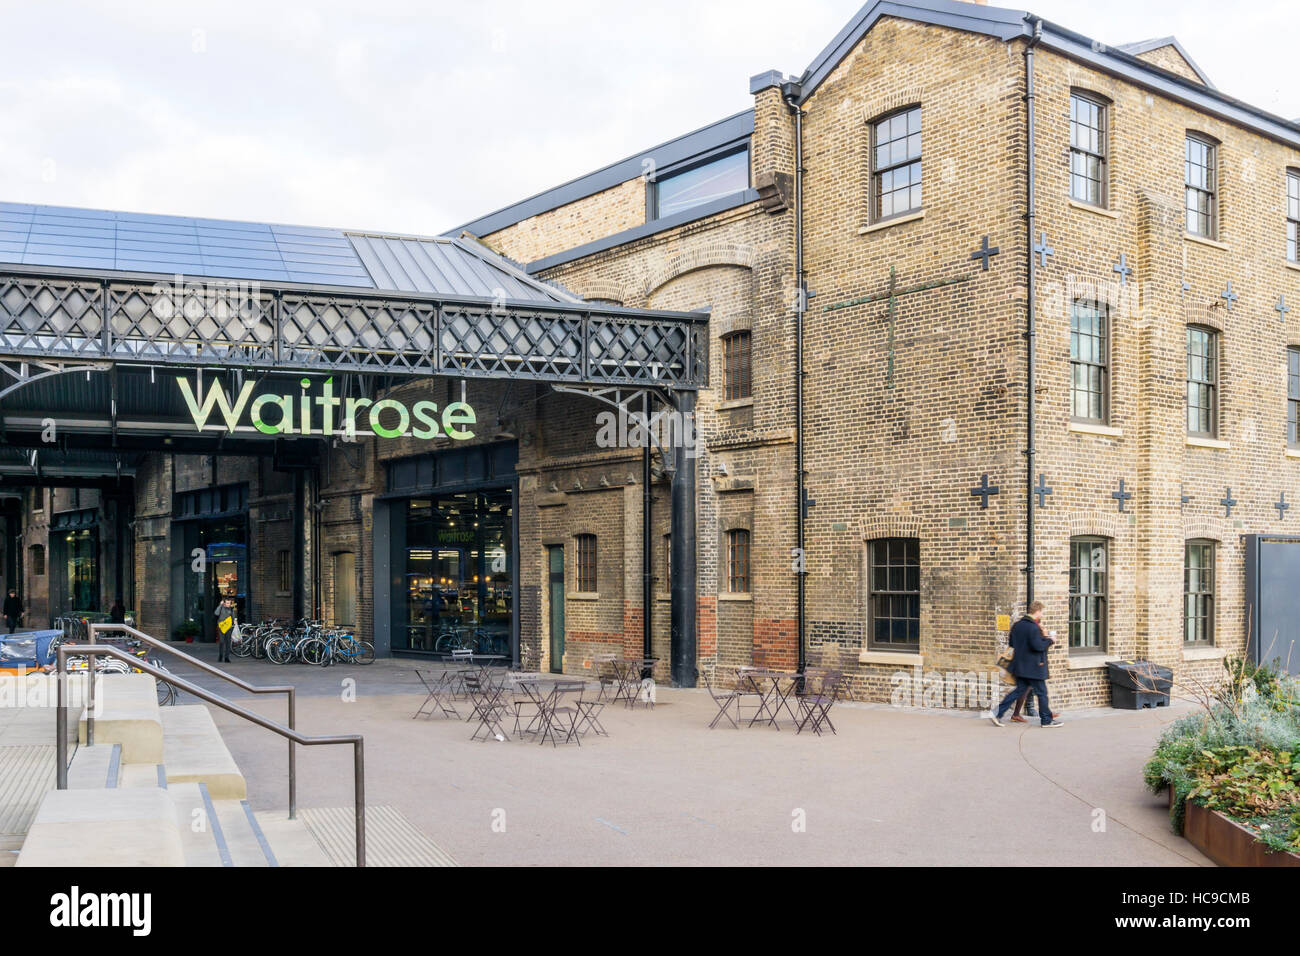 Waitrose supermarket in converted buildings at Granary Square, King's Cross, London. Stock Photo